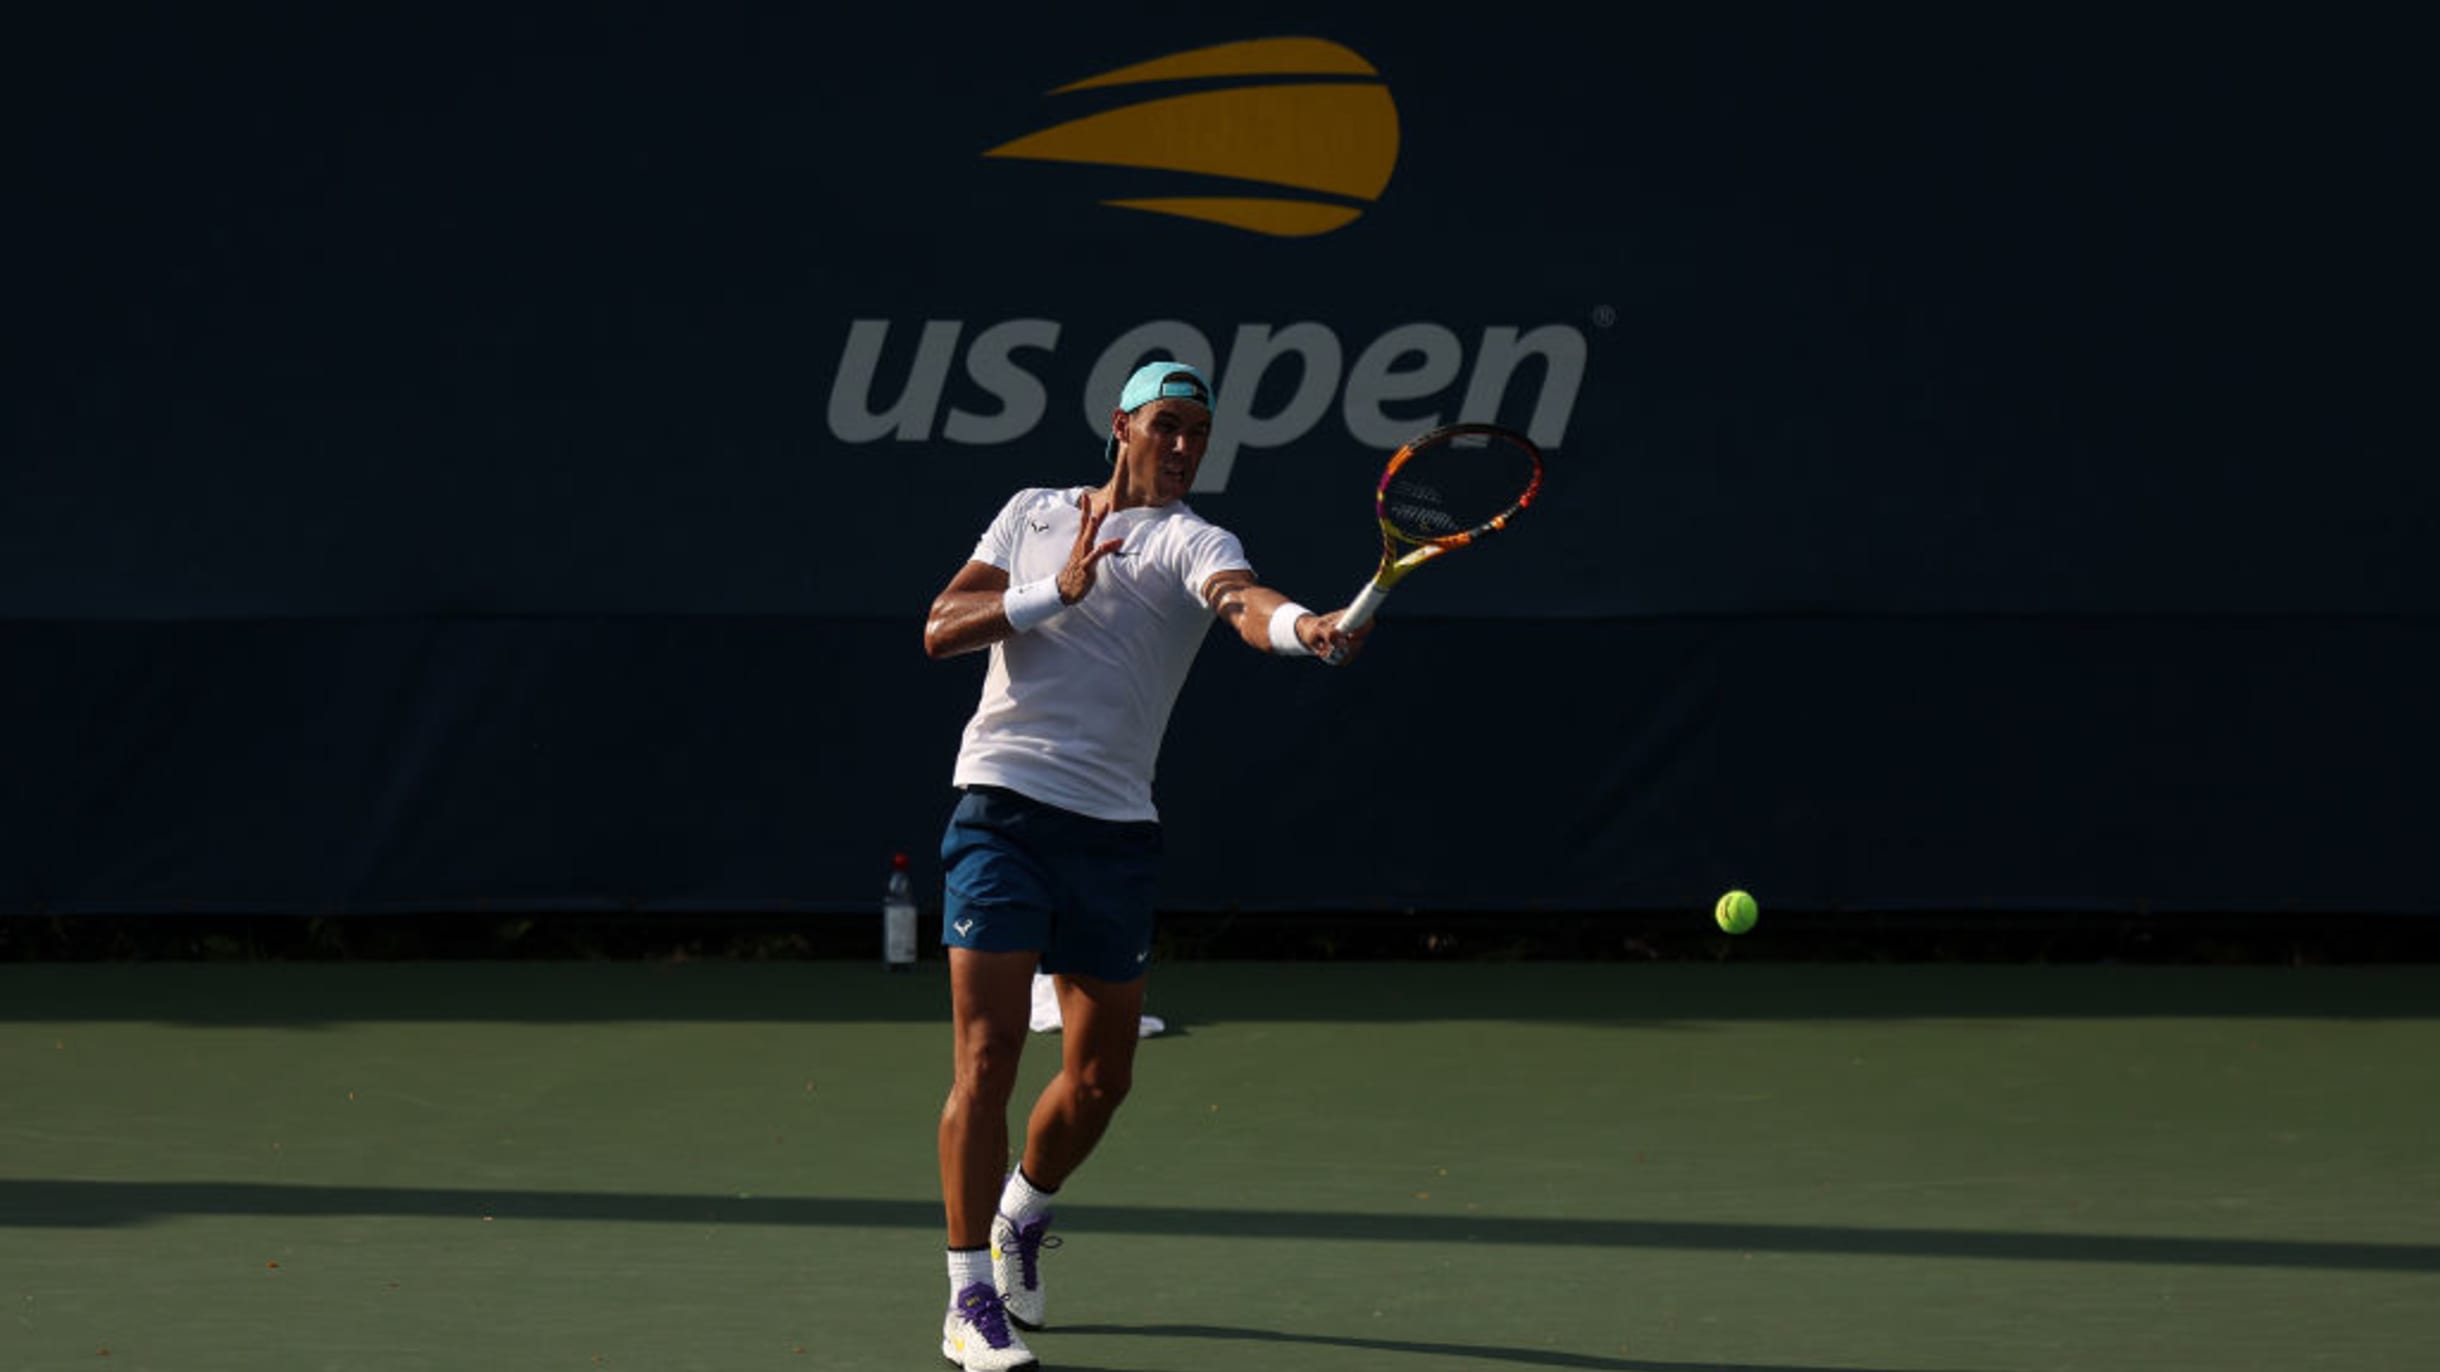 US Open 2022 Watch live streaming and telecast in India